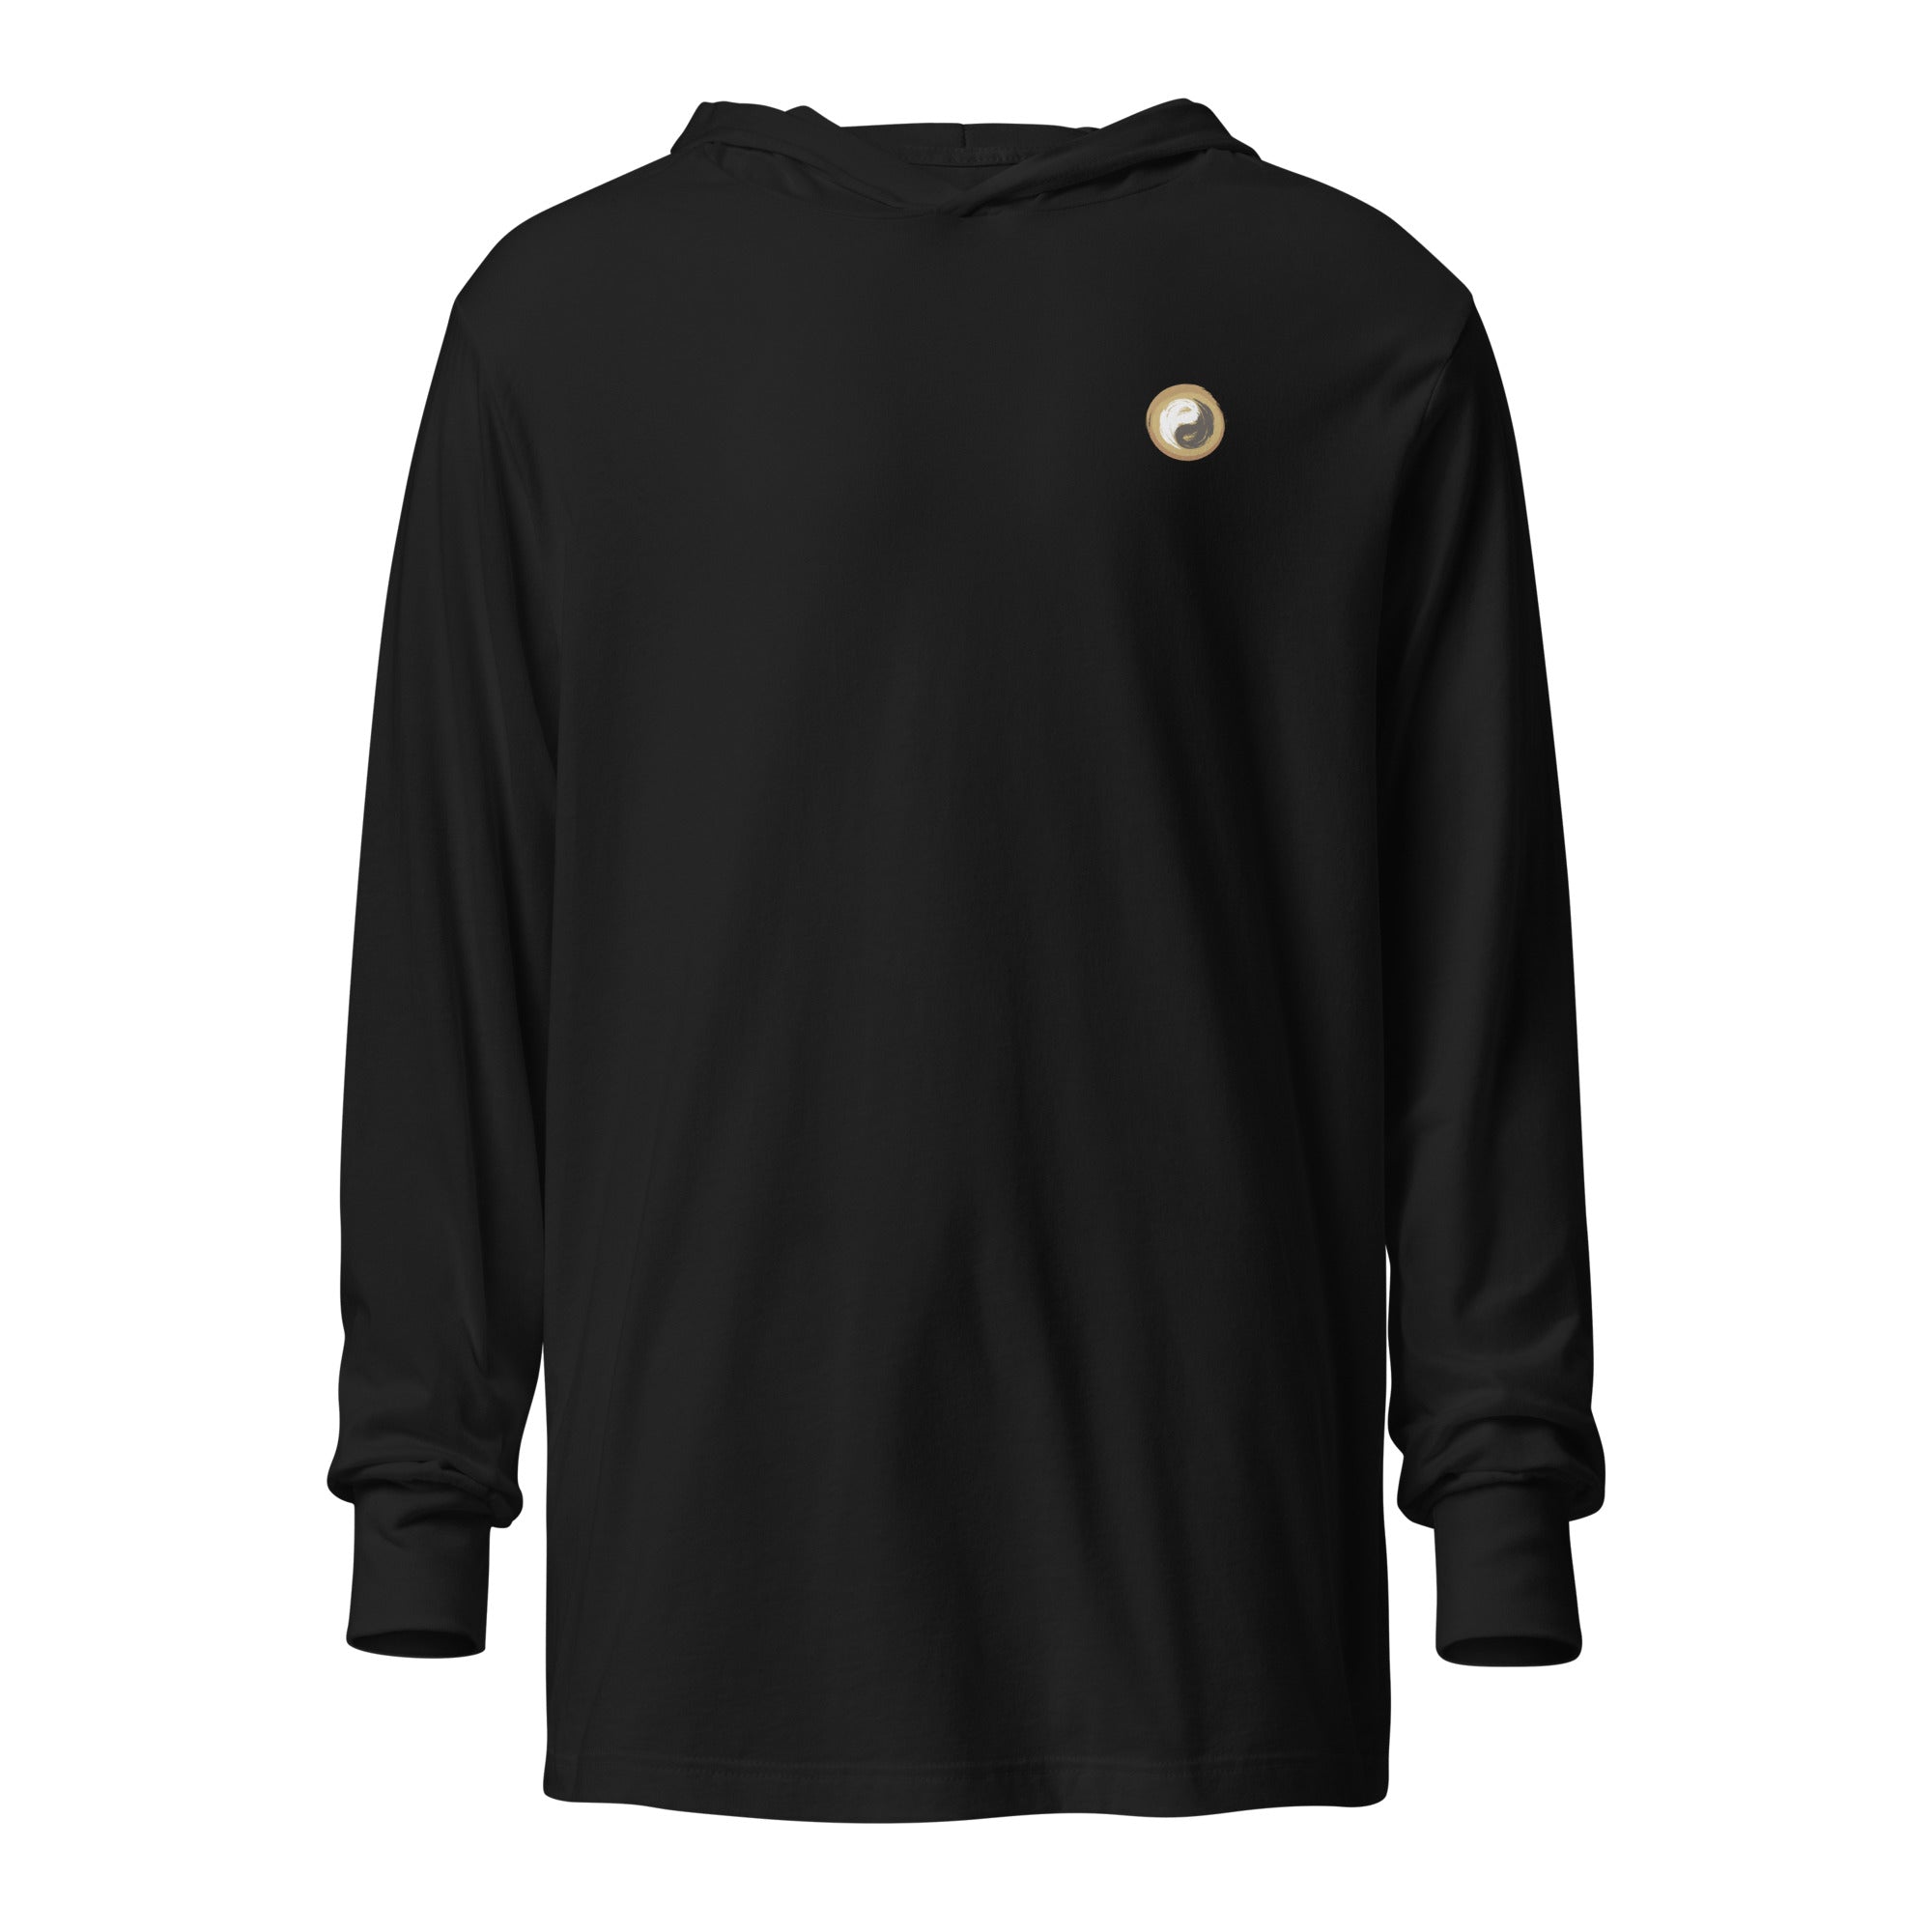 PersonalHour Style - Hooded long-sleeve tee - Personal Hour for Yoga and Meditations